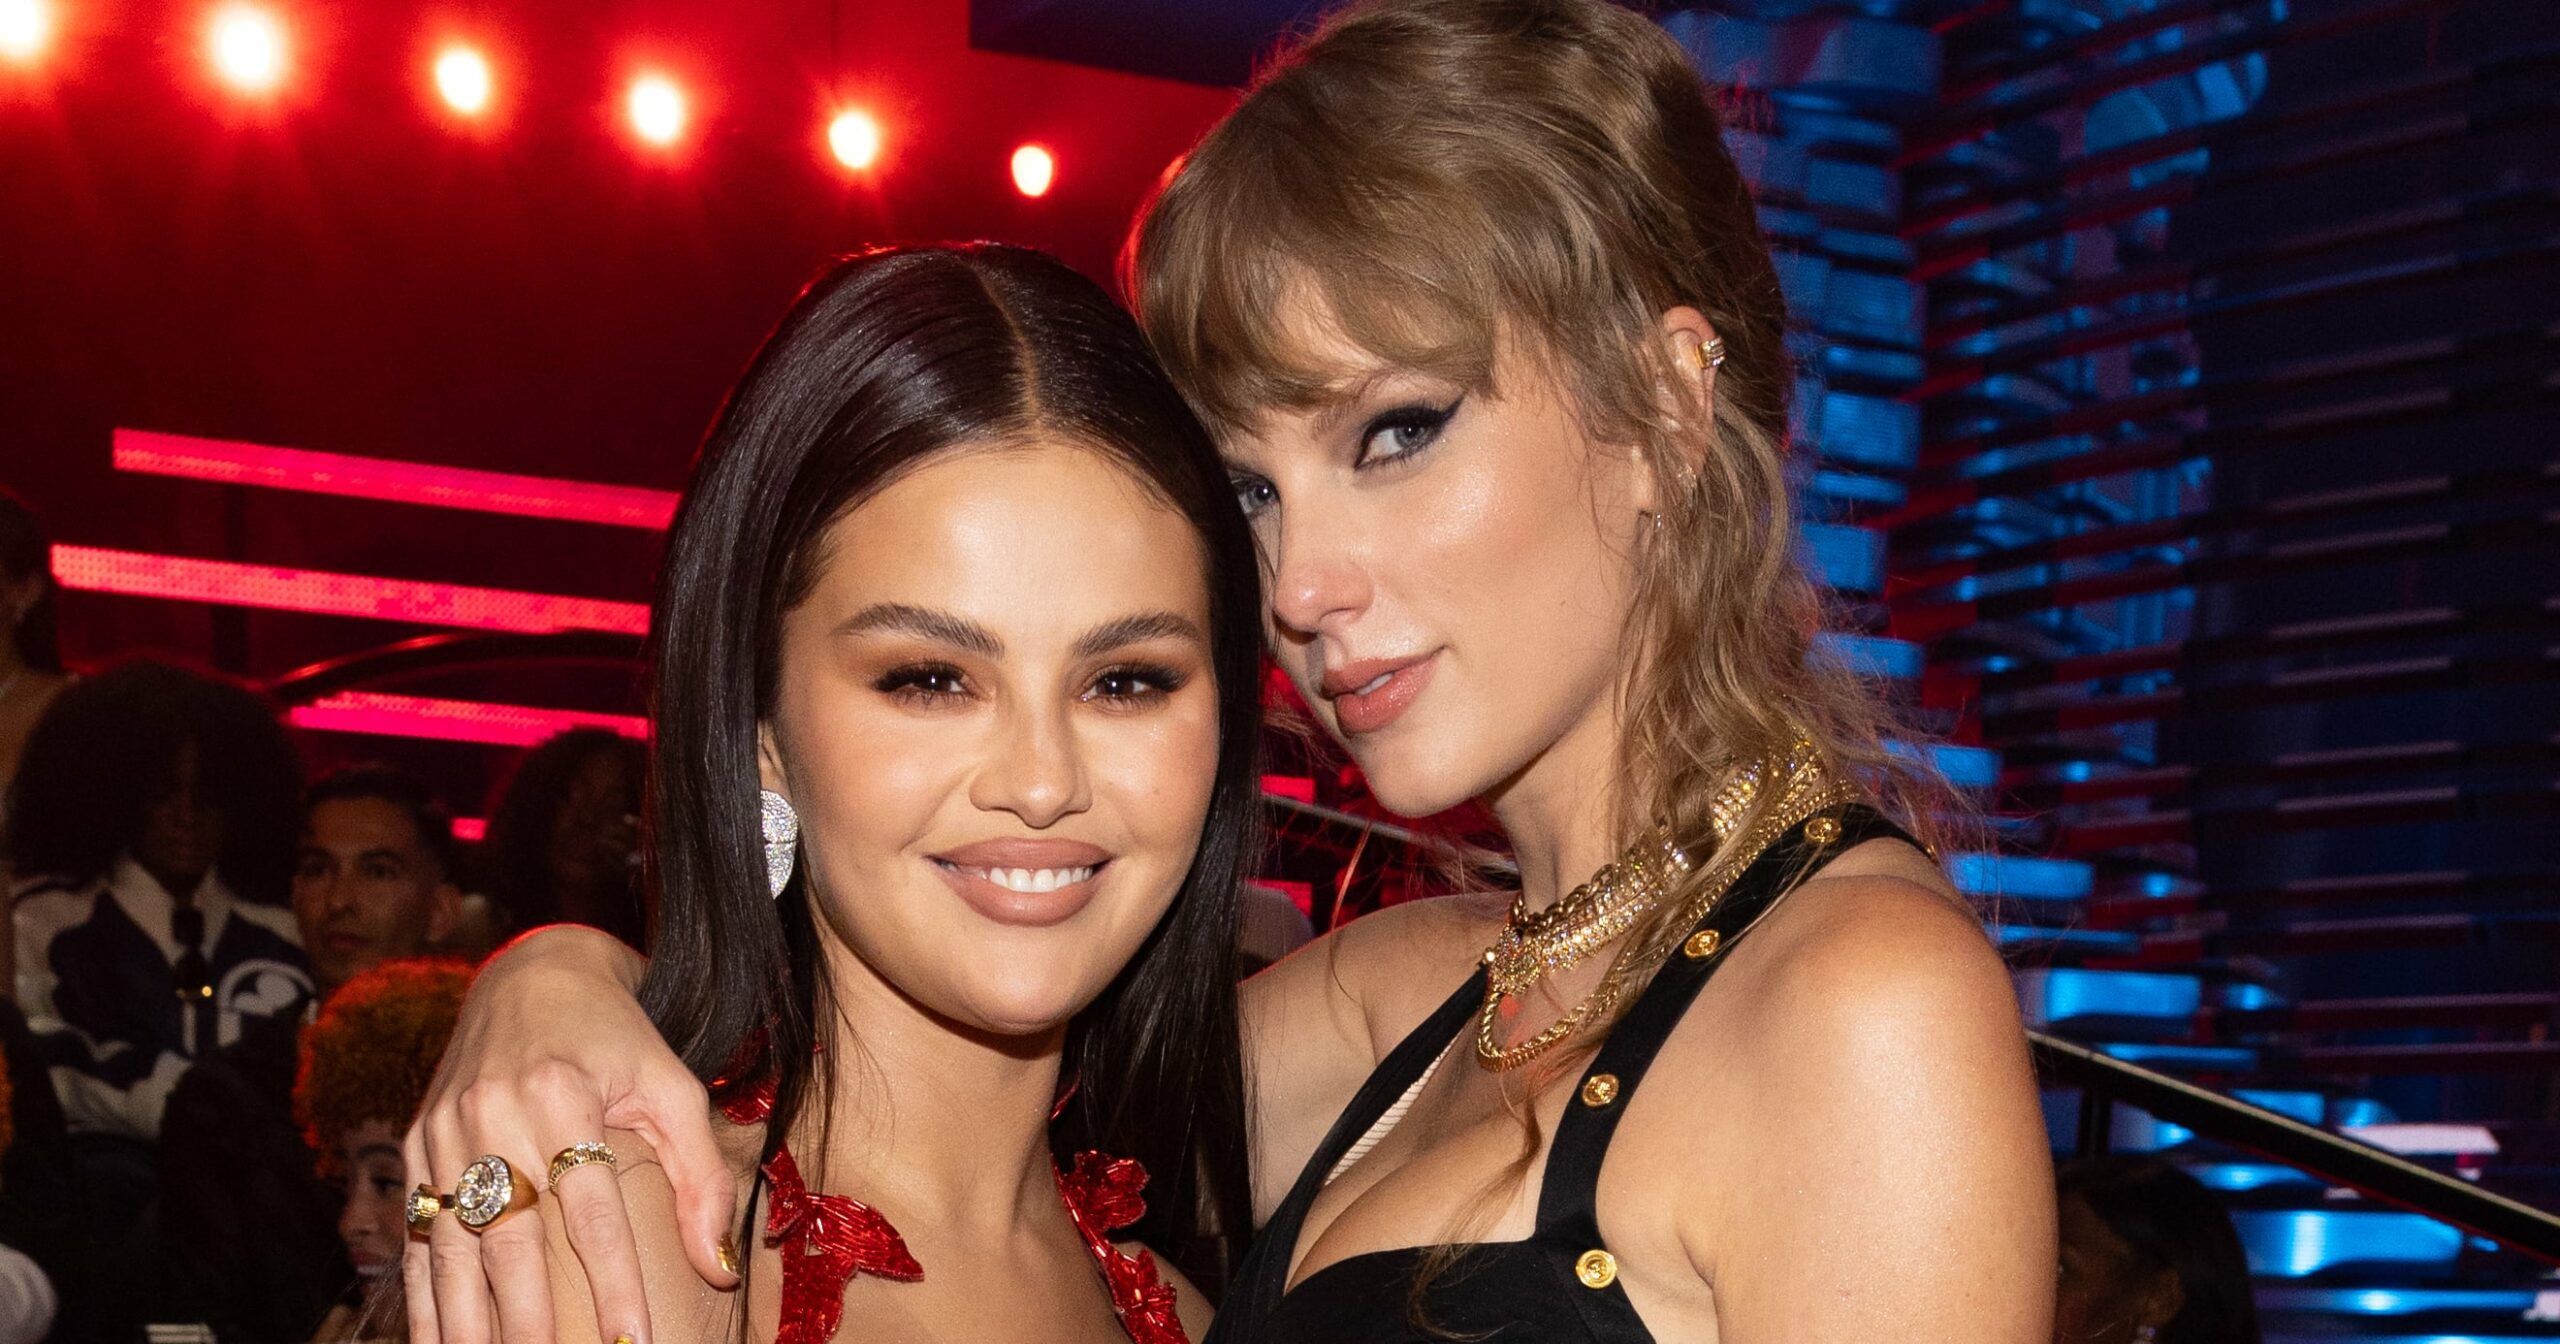 relive-taylor-swift-and-selena-gomez’s-15-year-friendship